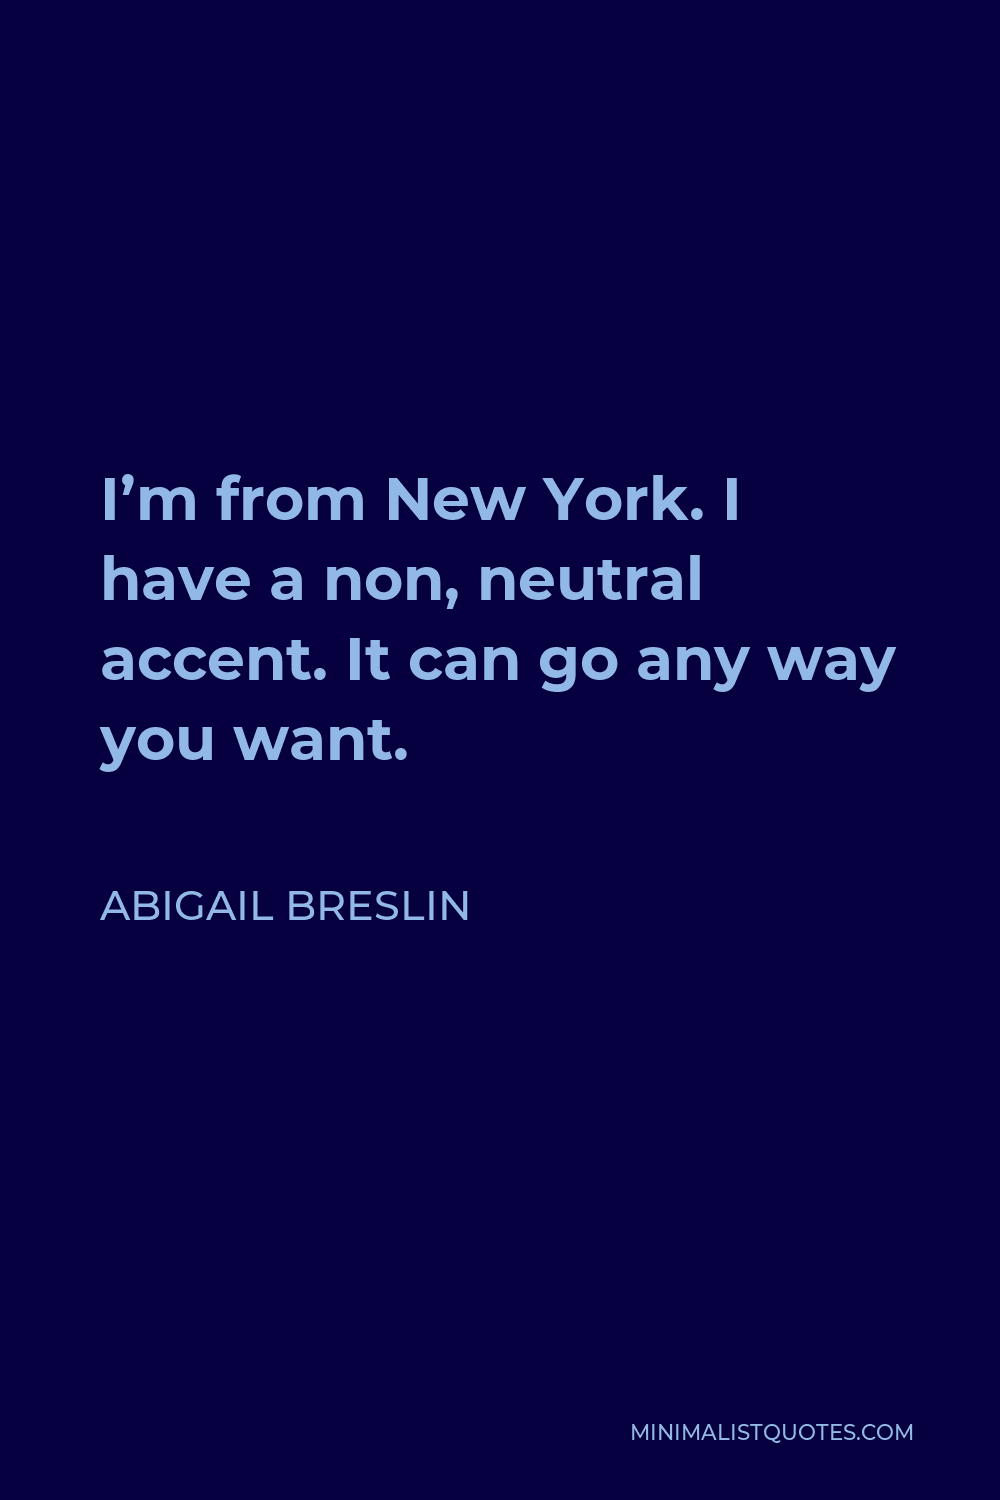 Abigail Breslin Quote - I’m from New York. I have a non, neutral accent. It can go any way you want.